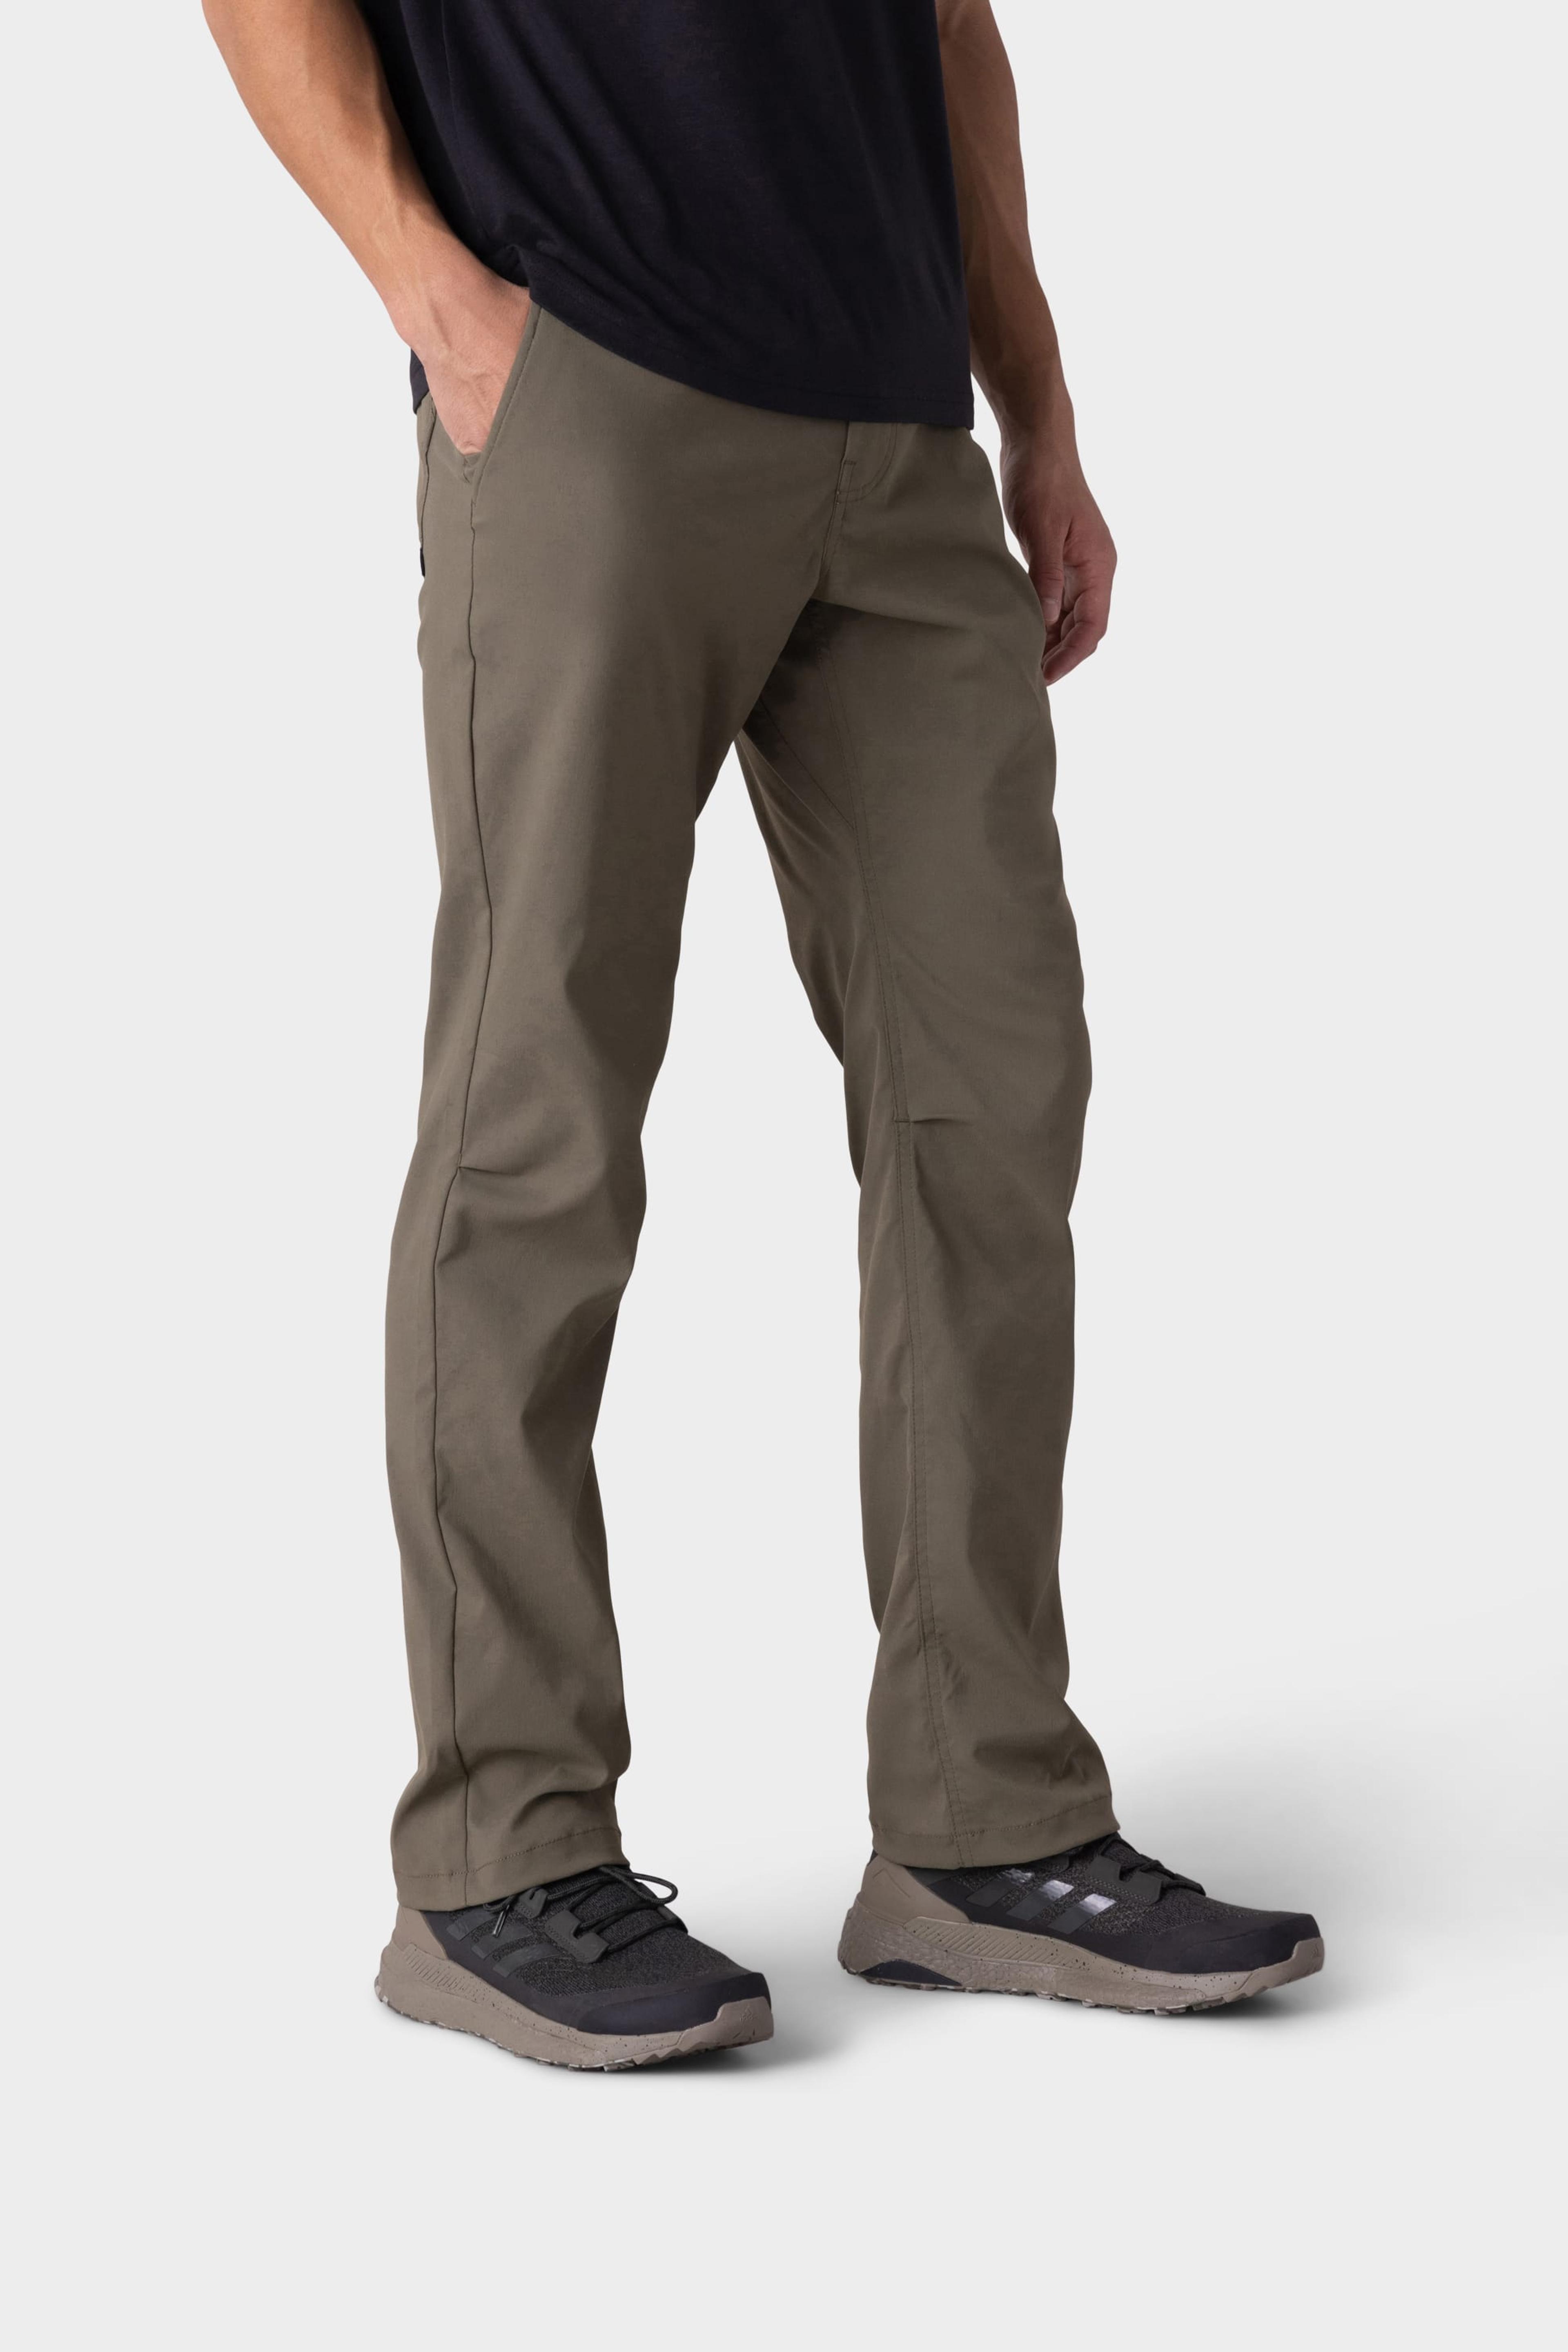 Alternate View 40 of 686 Men's Everywhere Pant - Relaxed Fit